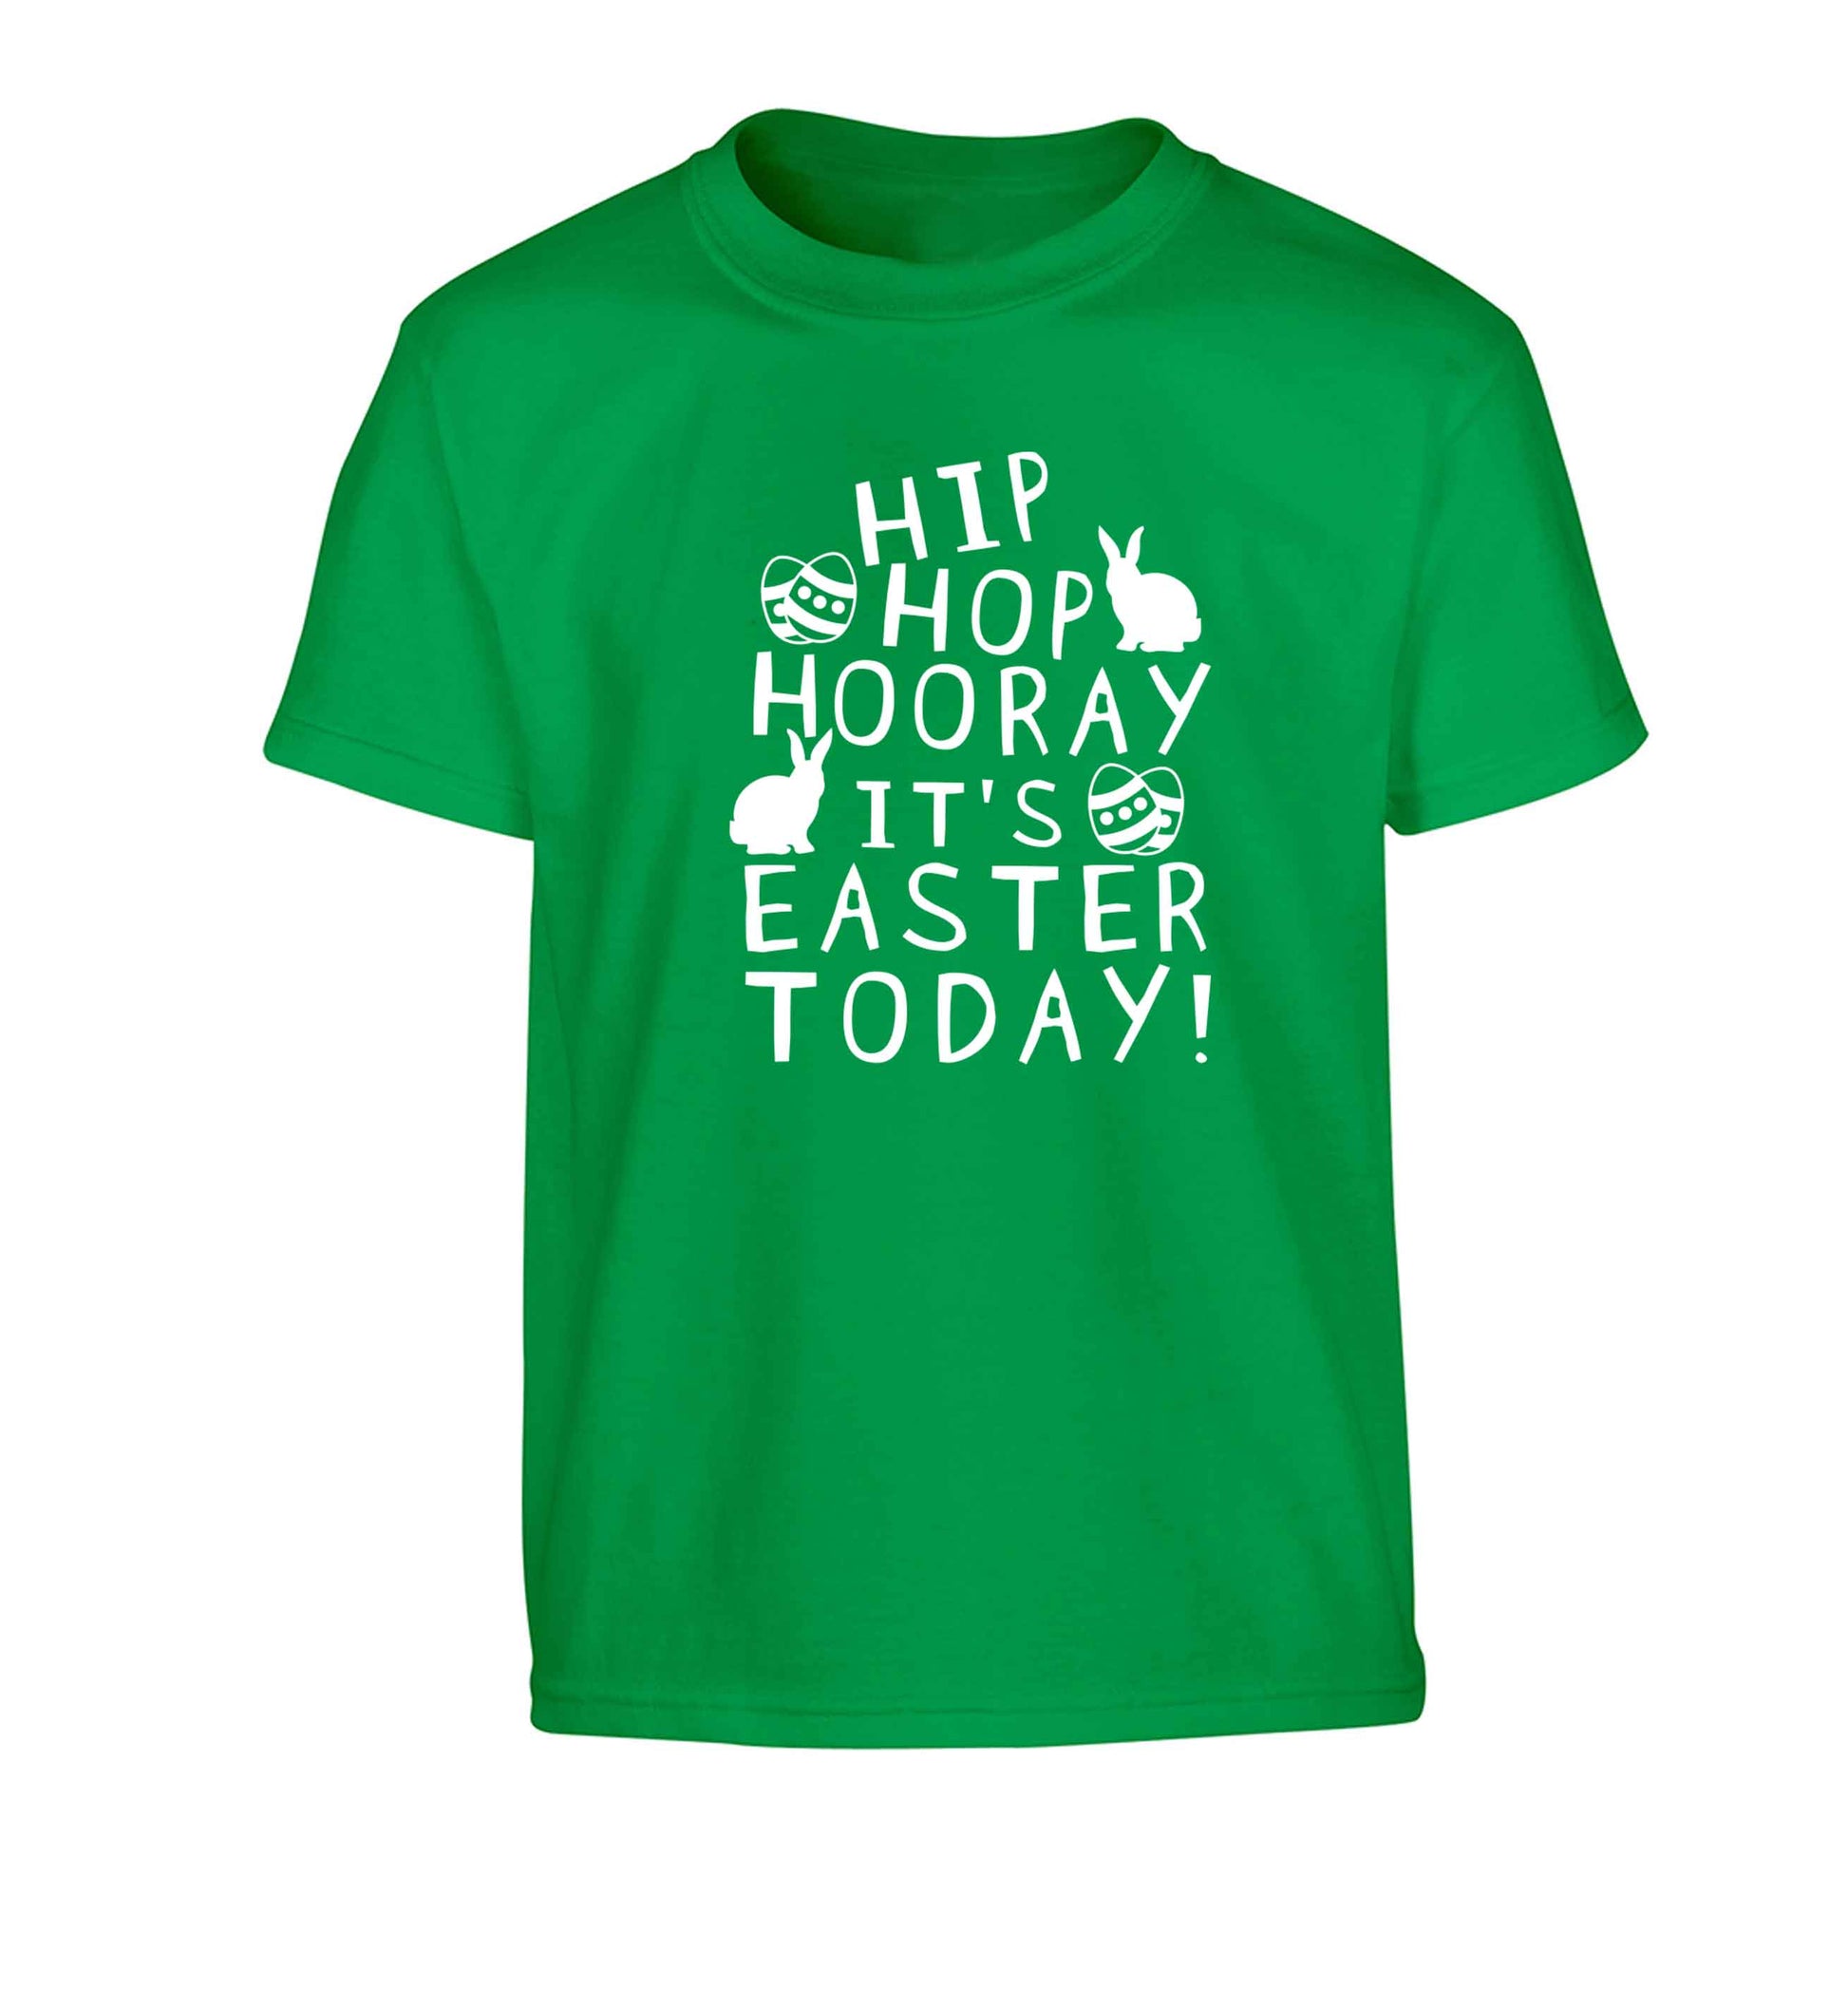 Hip hip hooray it's Easter today! Children's green Tshirt 12-13 Years